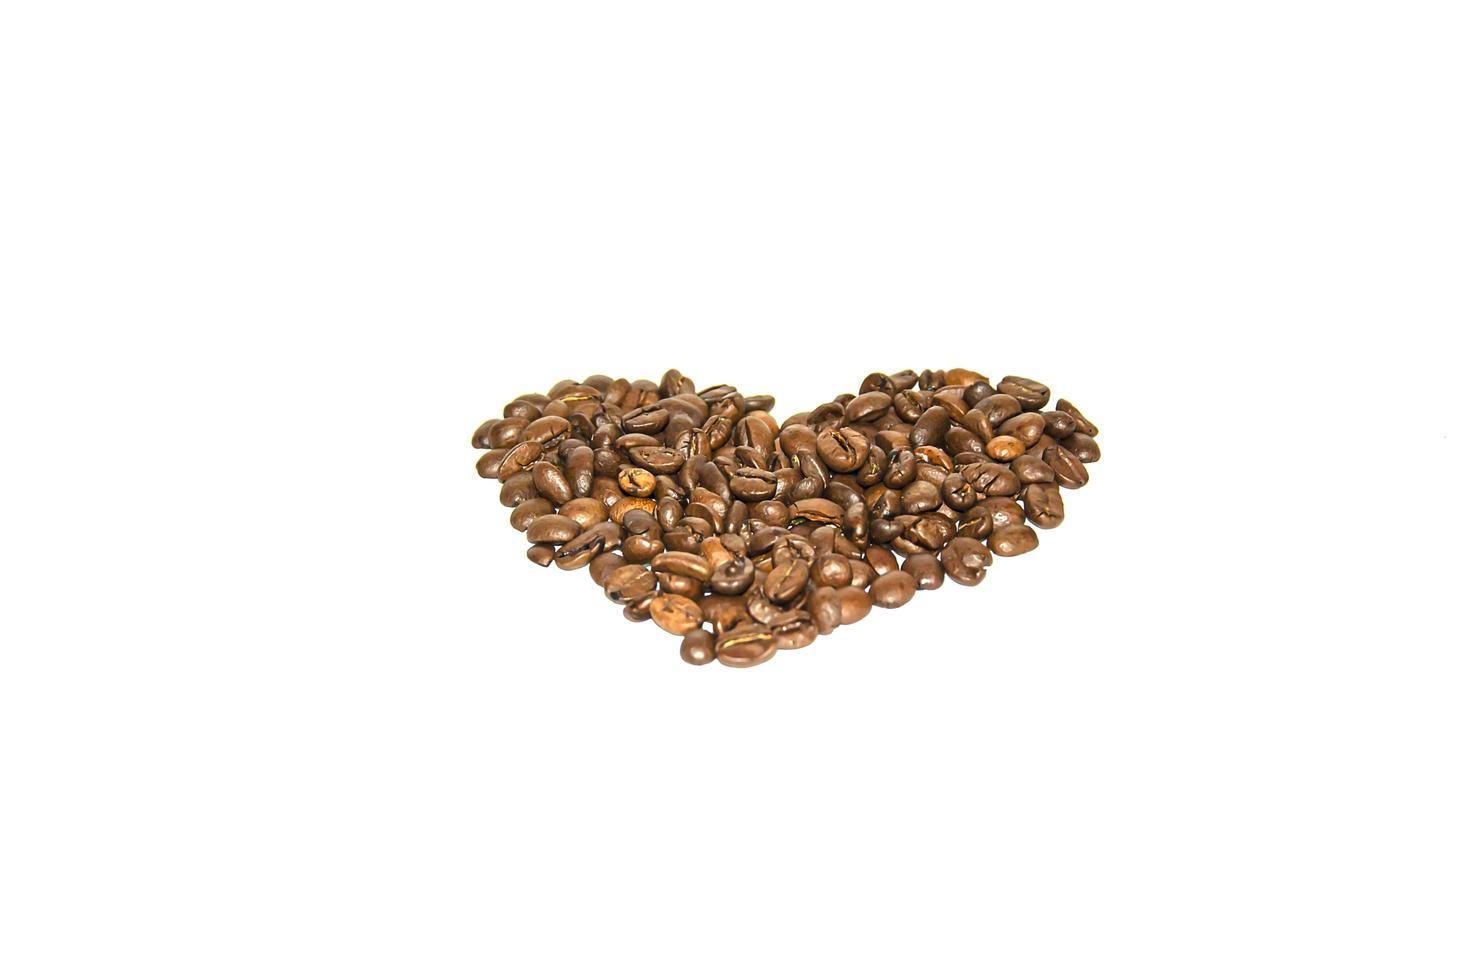 Coffee beans spread out in the shape of a heart on a white background. Isolate. Lifestyle photo